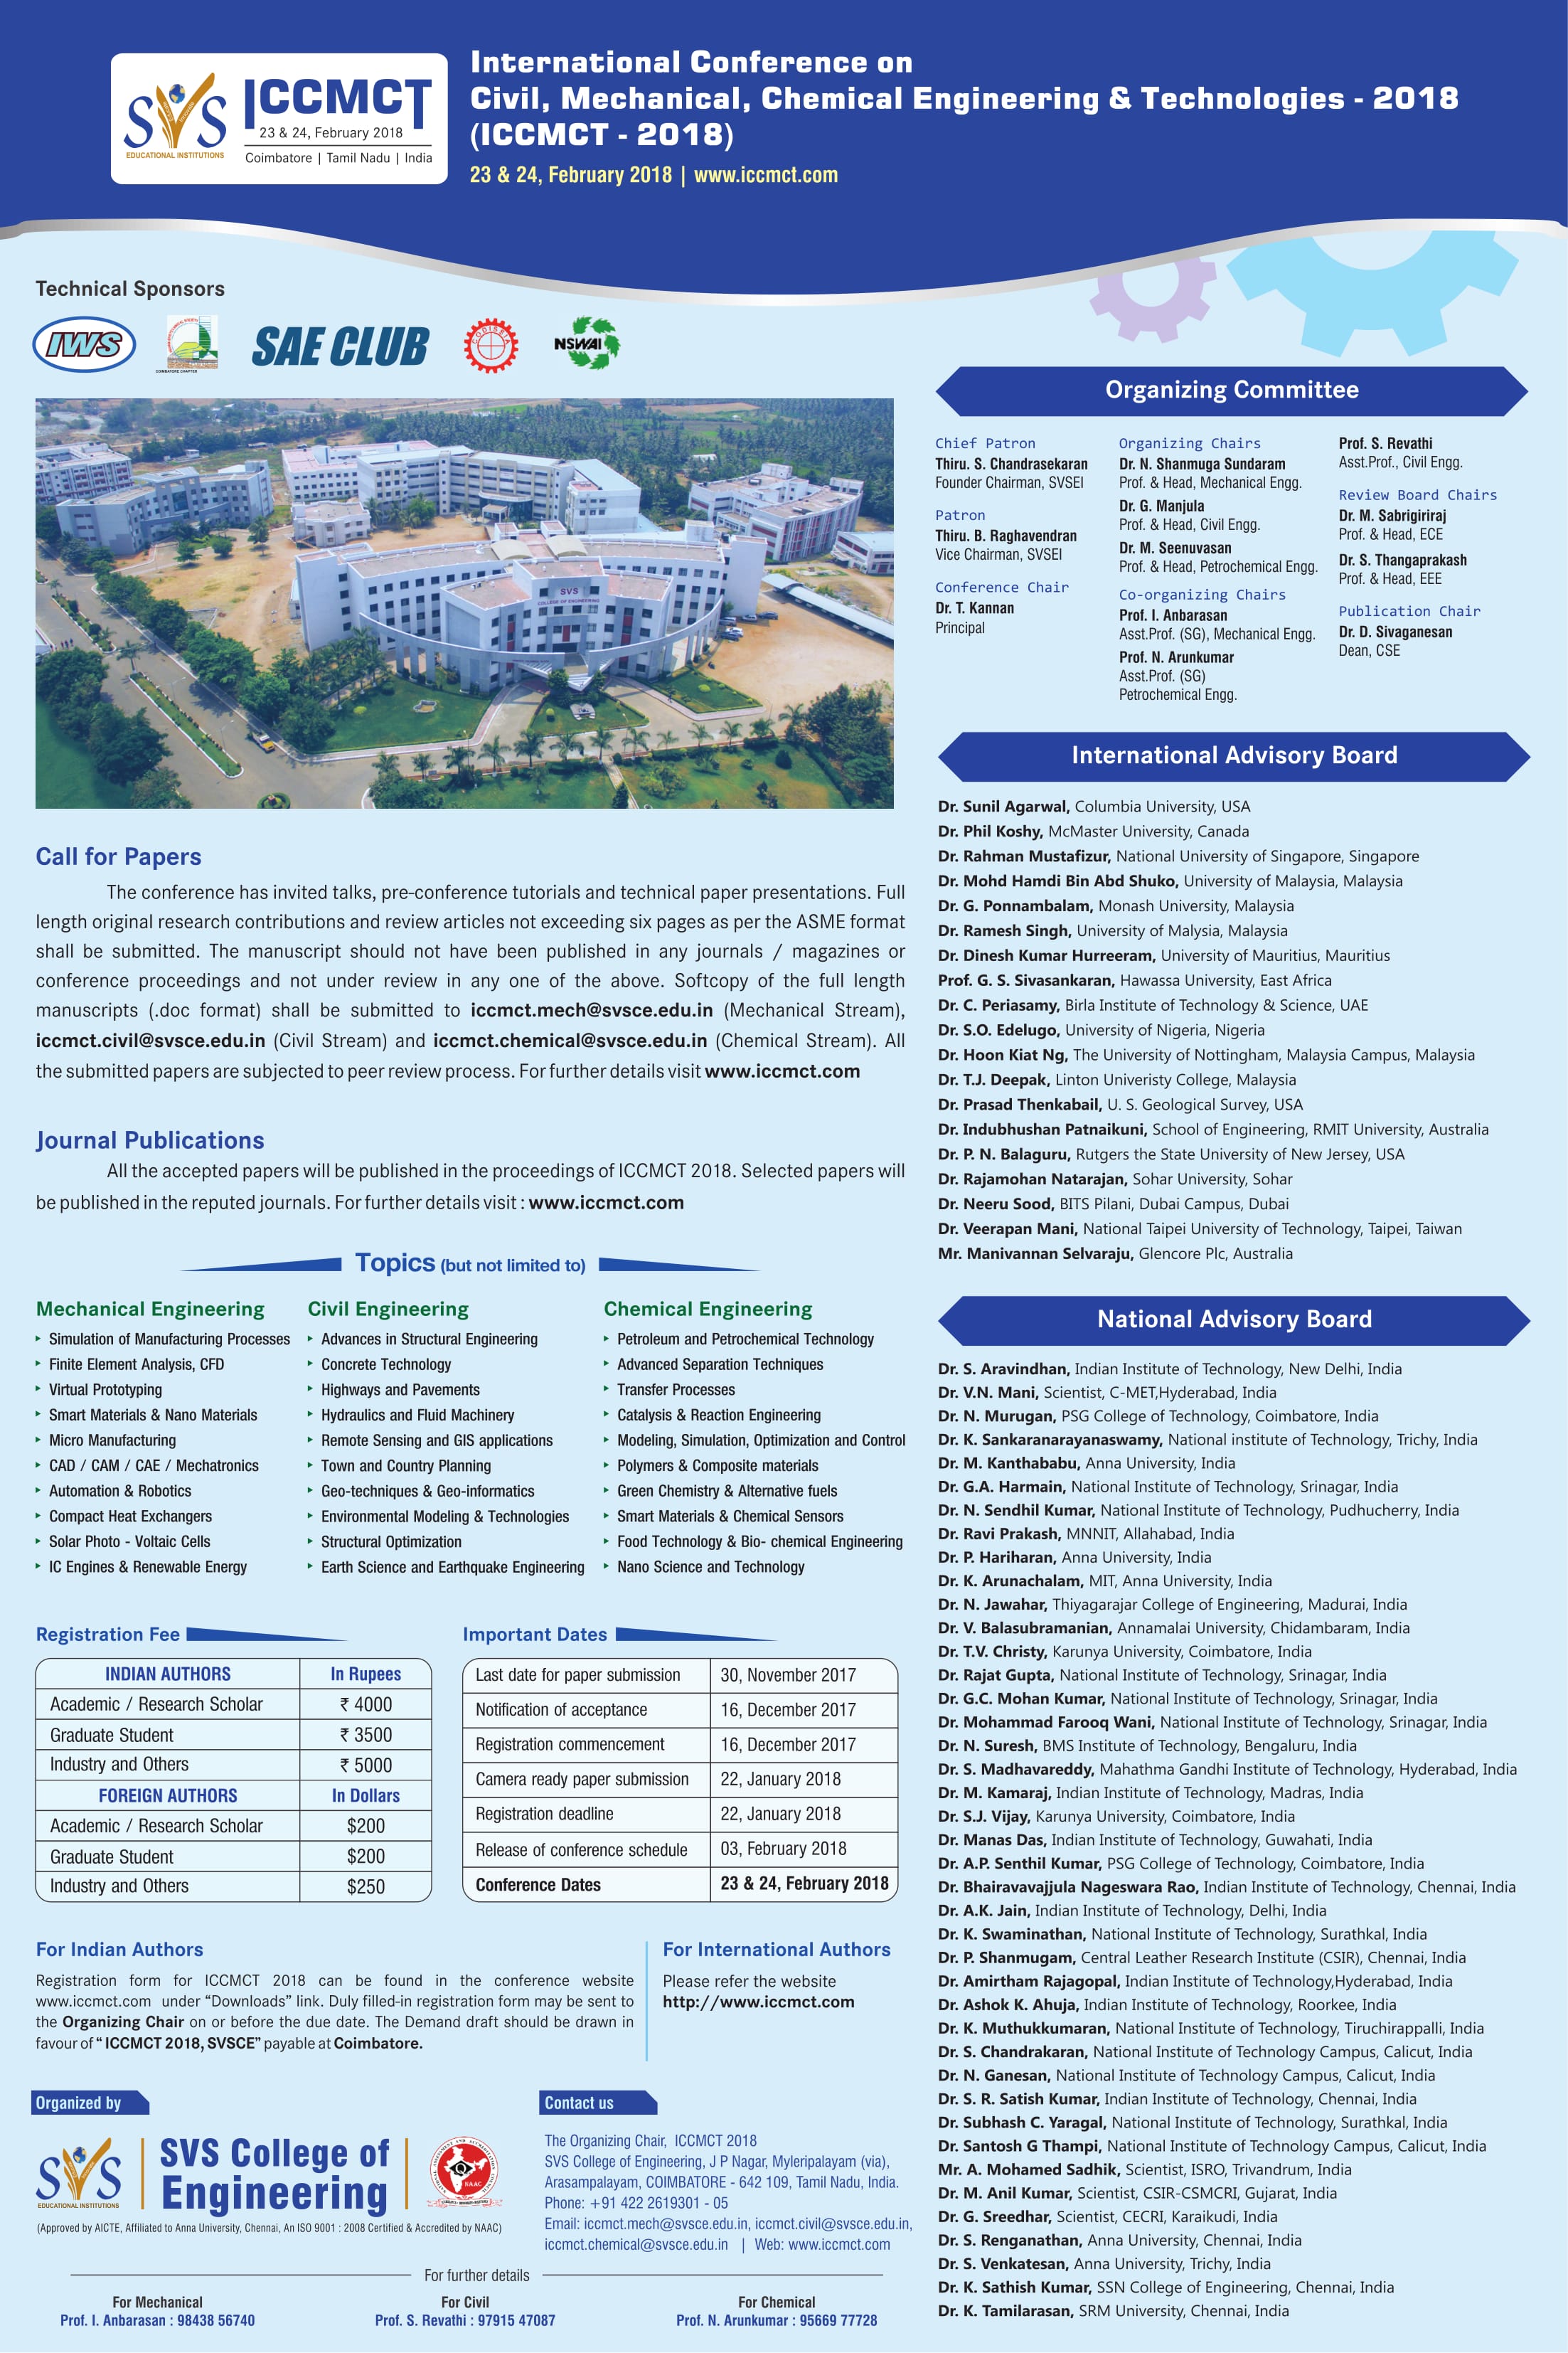 International Conference on Civil, Mechanical, Chemical Engineering and Technologies ICCMCT 2018